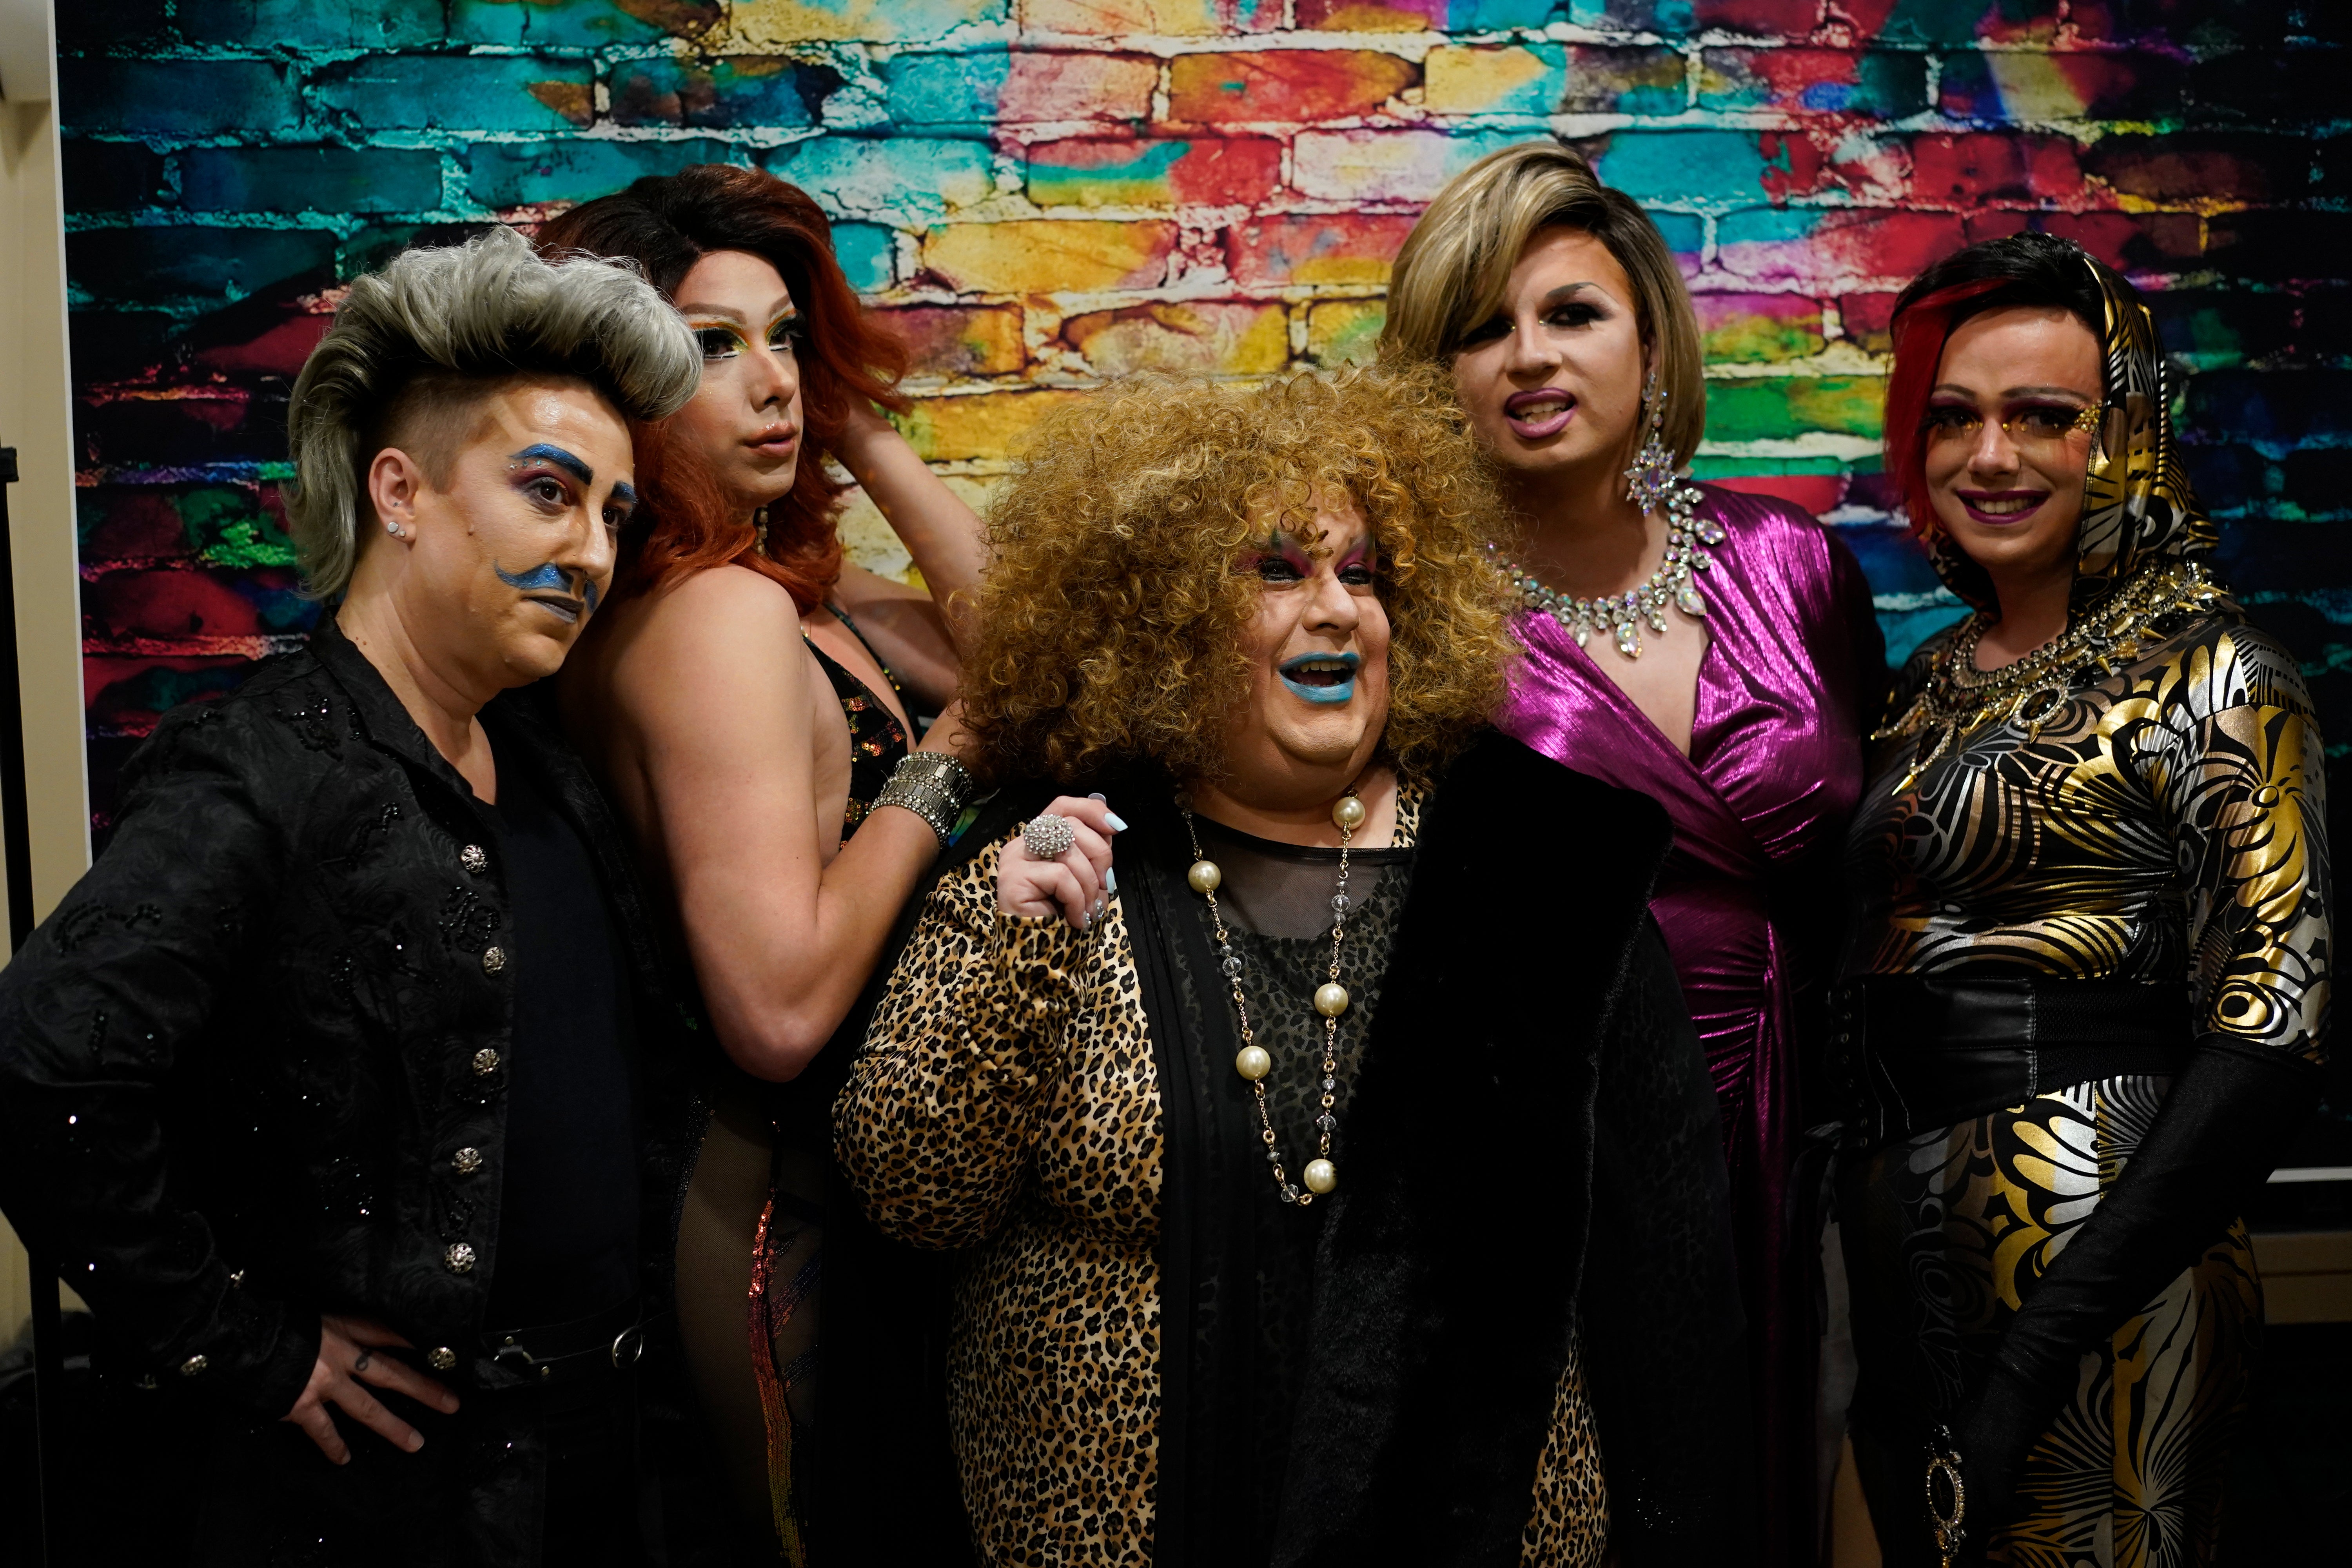 Drag queens are out, proud and loud in a string of coal towns, from a bingo hall to blue-collar bars The Independent